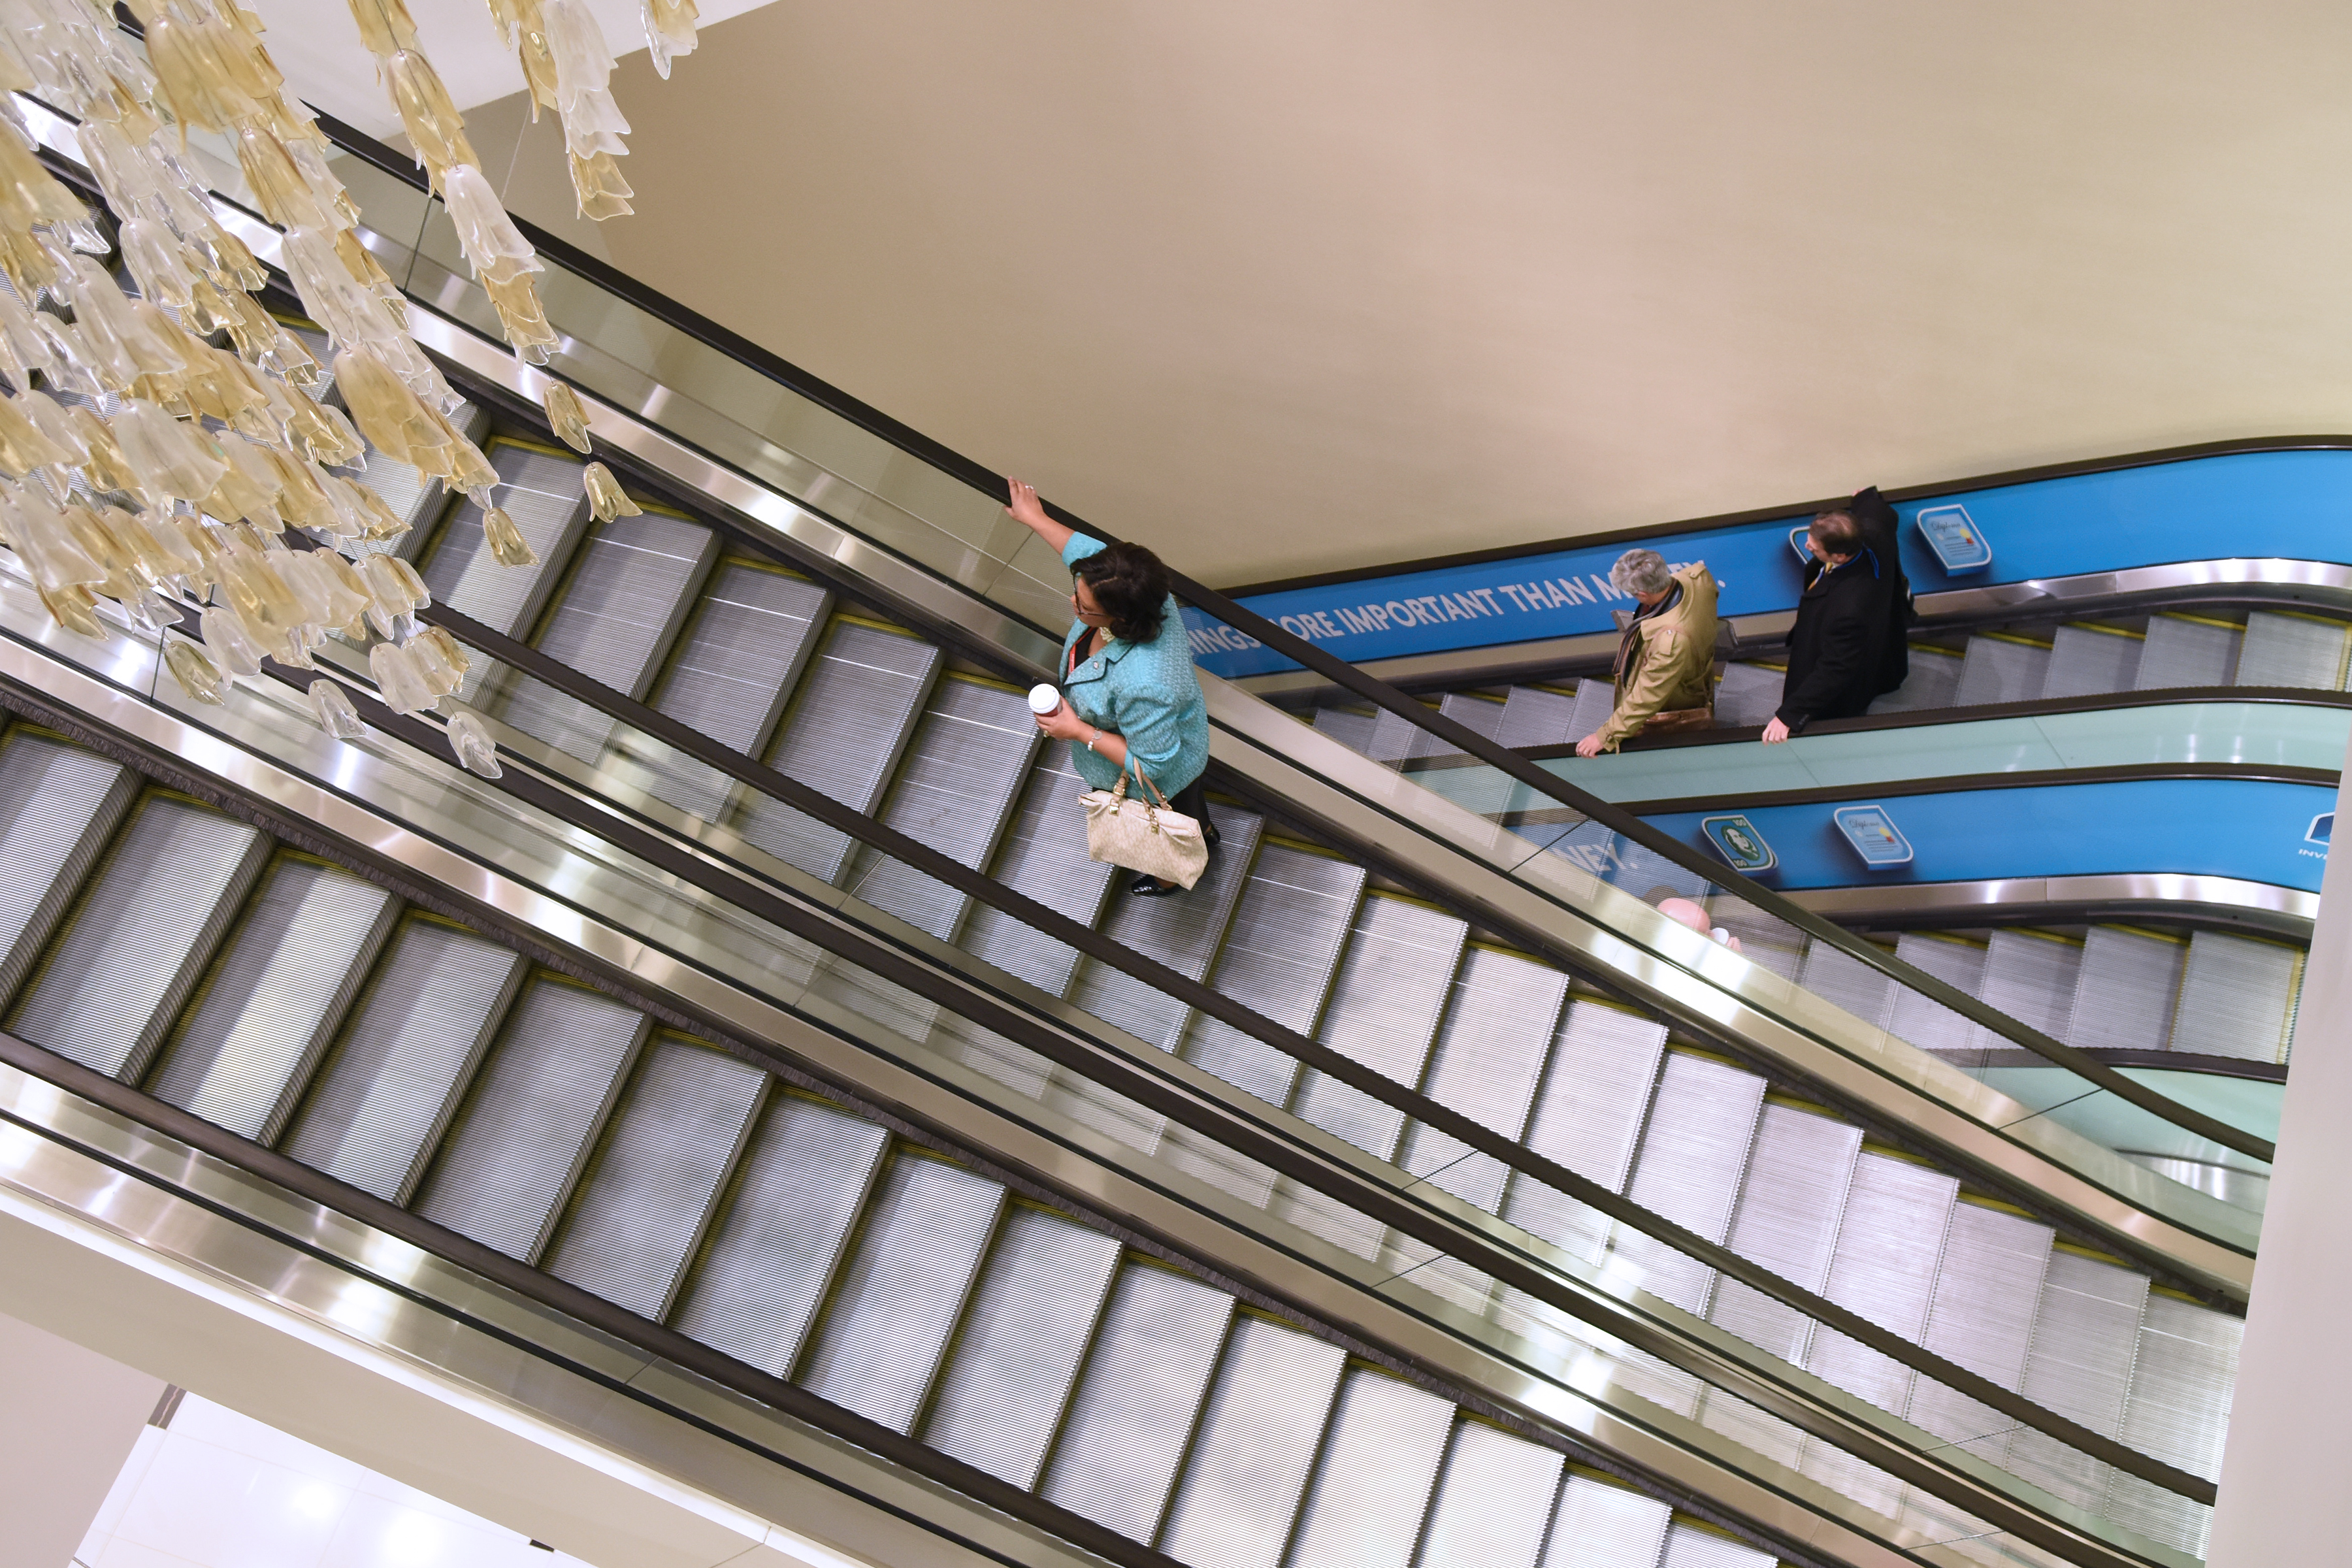 ACE2018 attendees on branded escalator